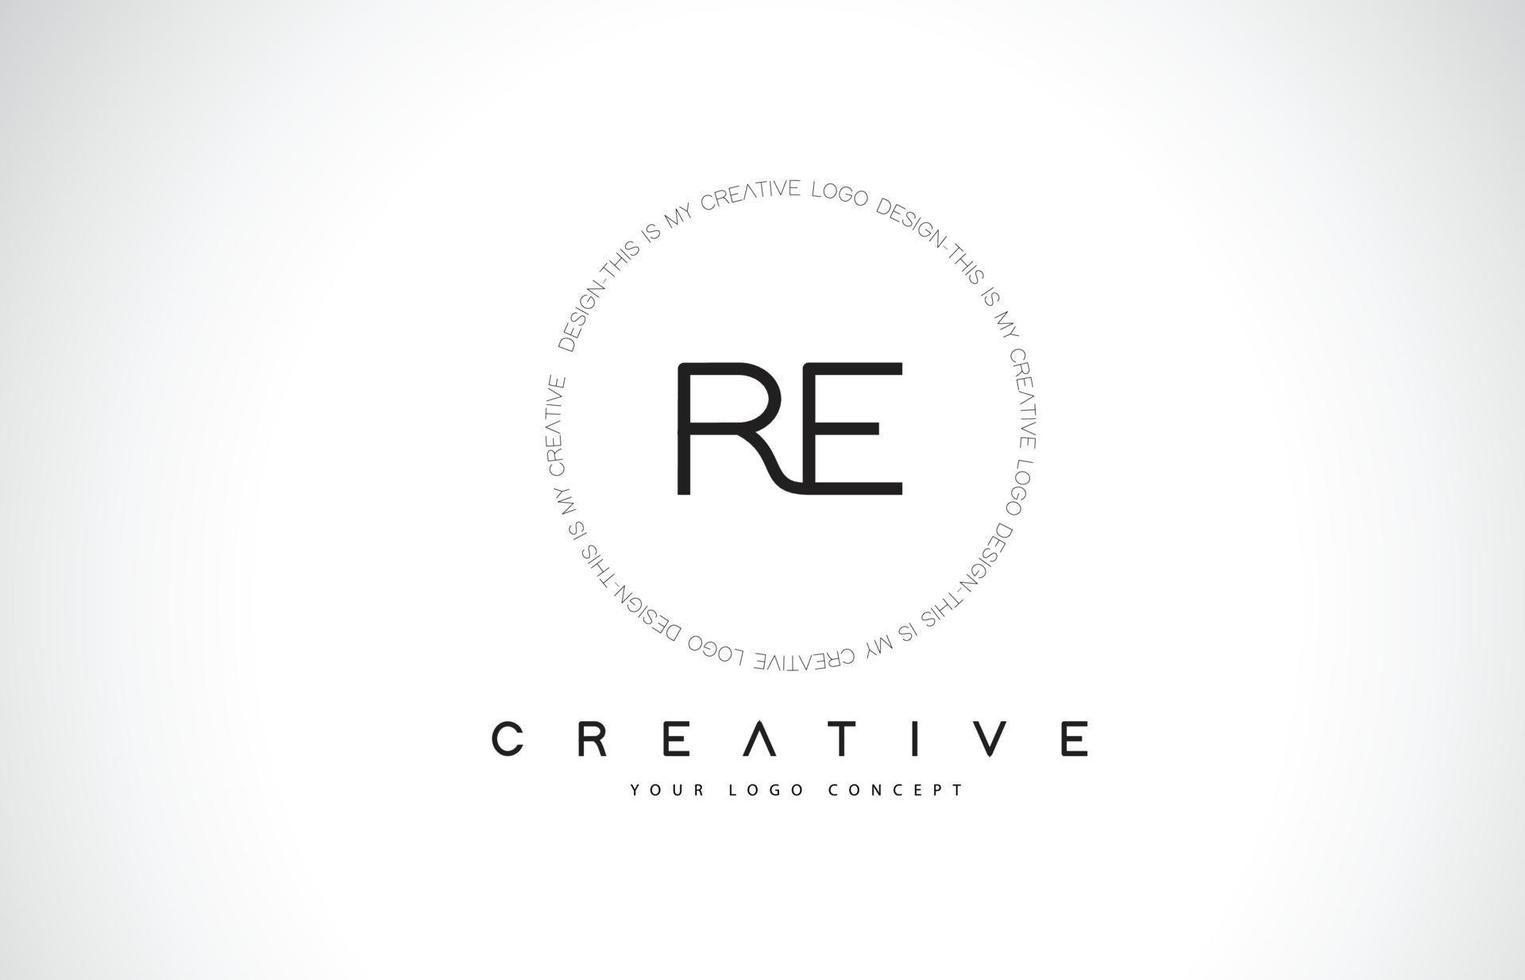 RE R E Logo Design with Black and White Creative Text Letter Vector. vector